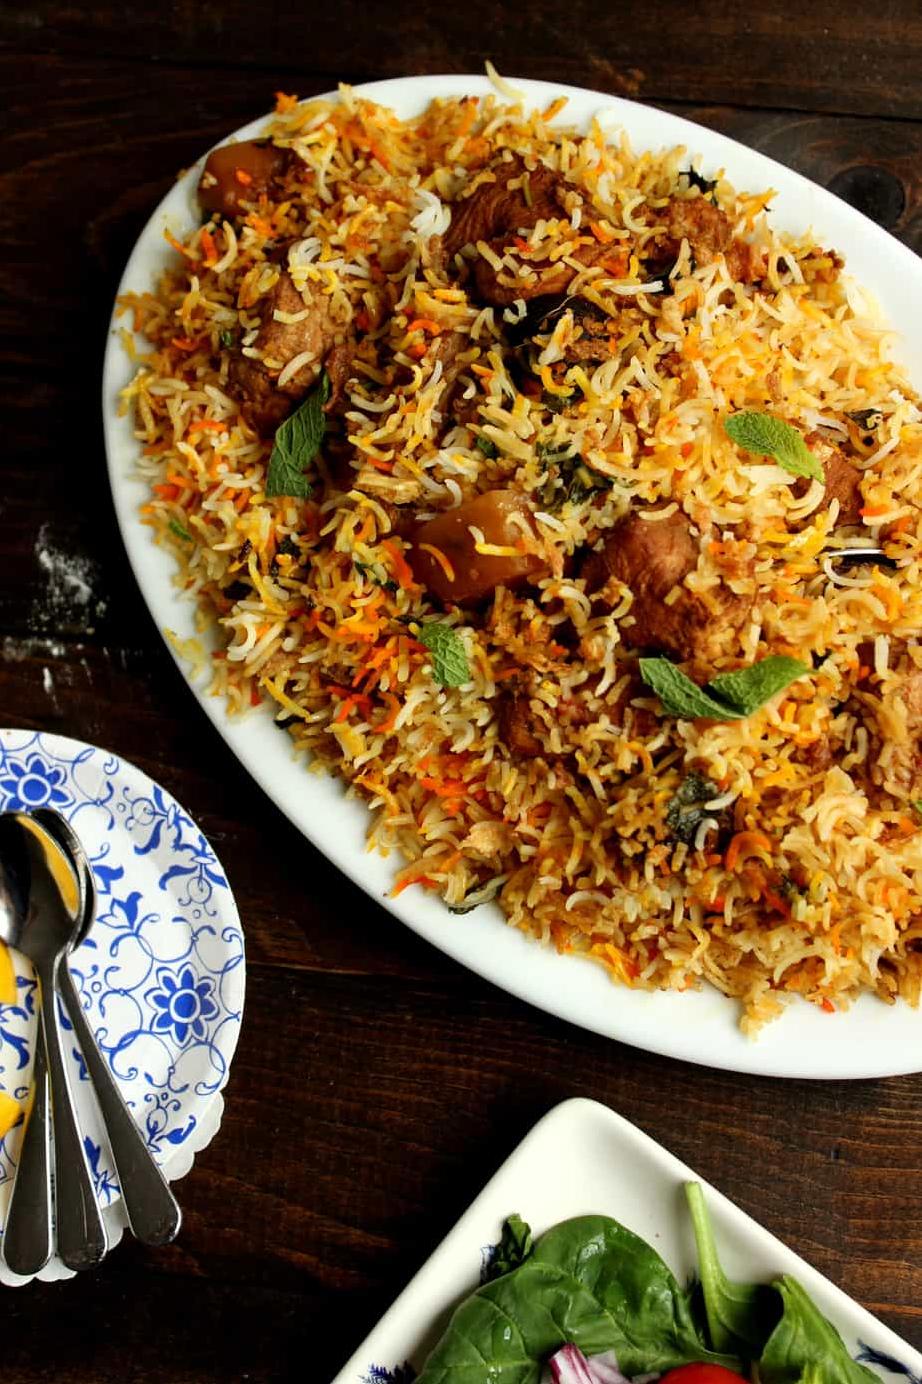  A colorful array of fragrant spices and fluffy rice awaits you.